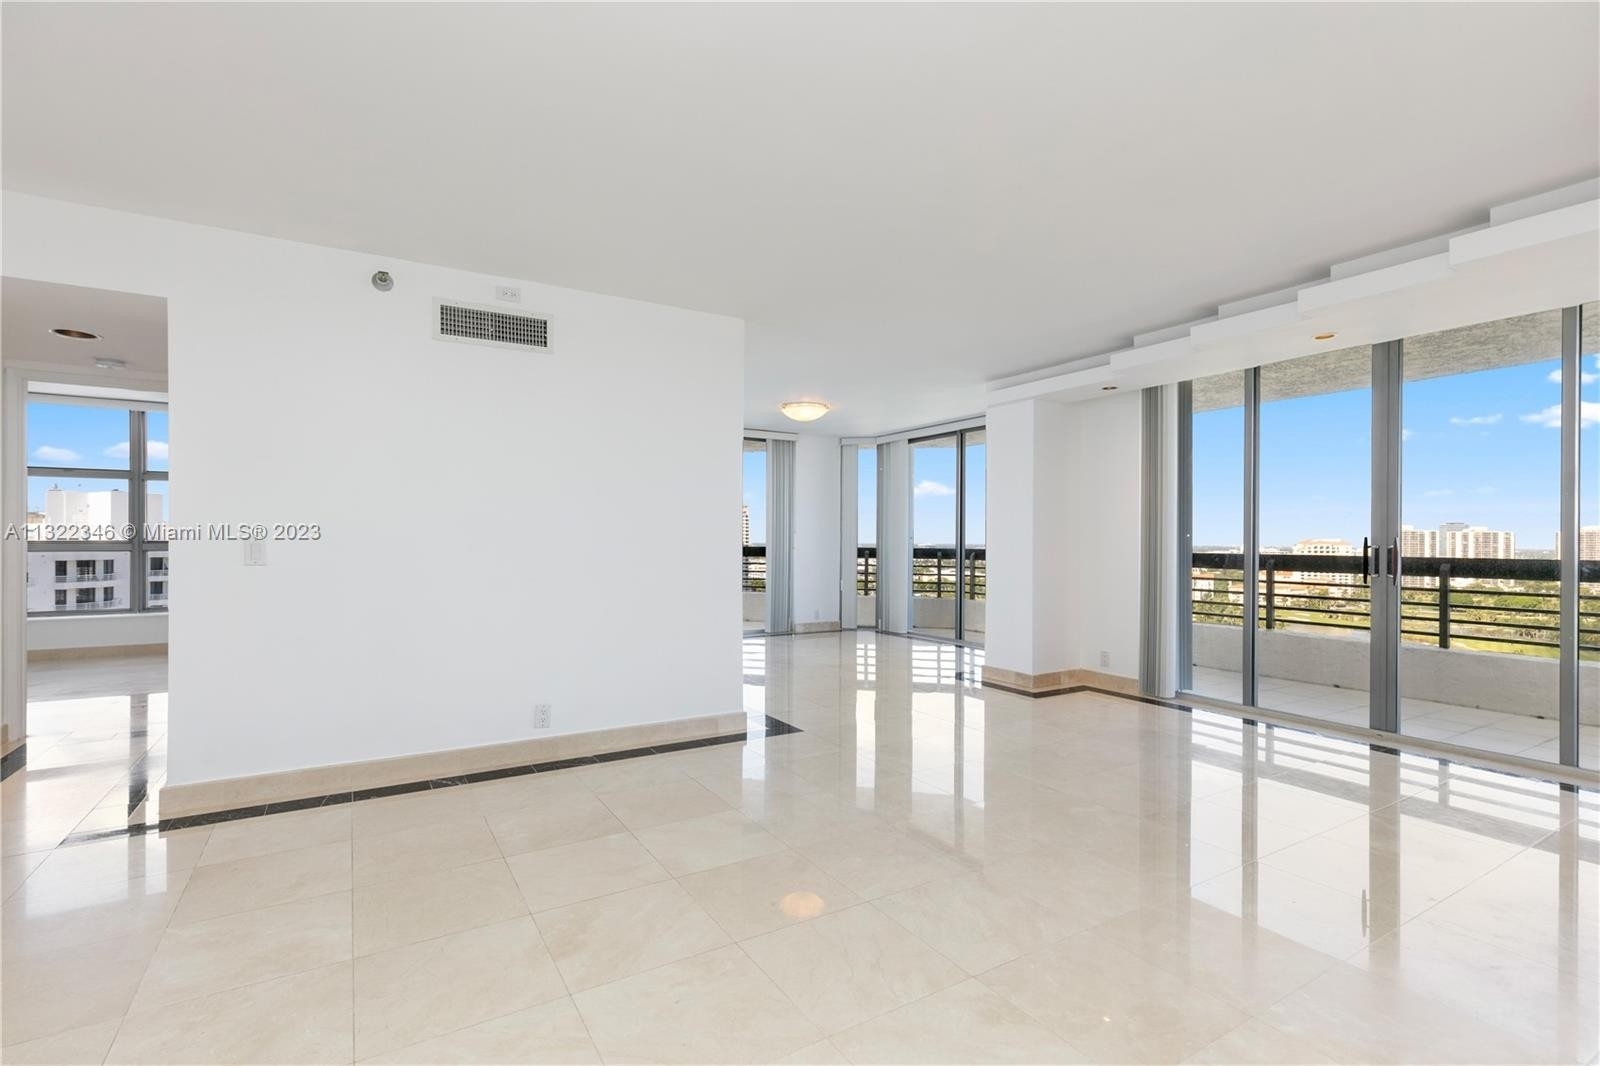 Condominium for Sale at 3400 NE 192nd St , LPH5 Biscayne Yacht and Country Club, Aventura, FL 33180